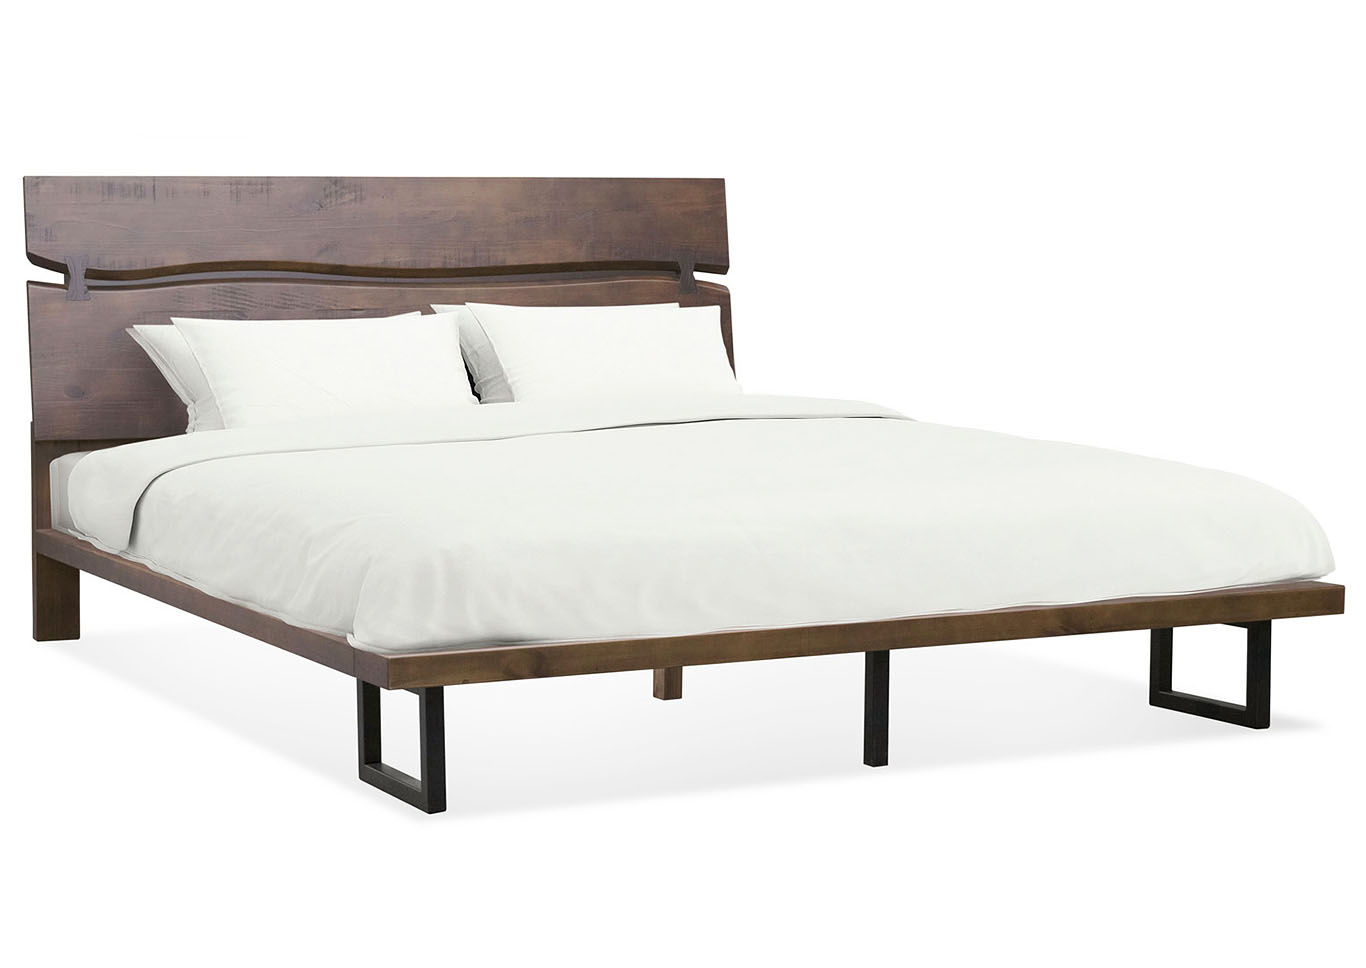 Pasco Brown Panel Queen Bed,Steve Silver